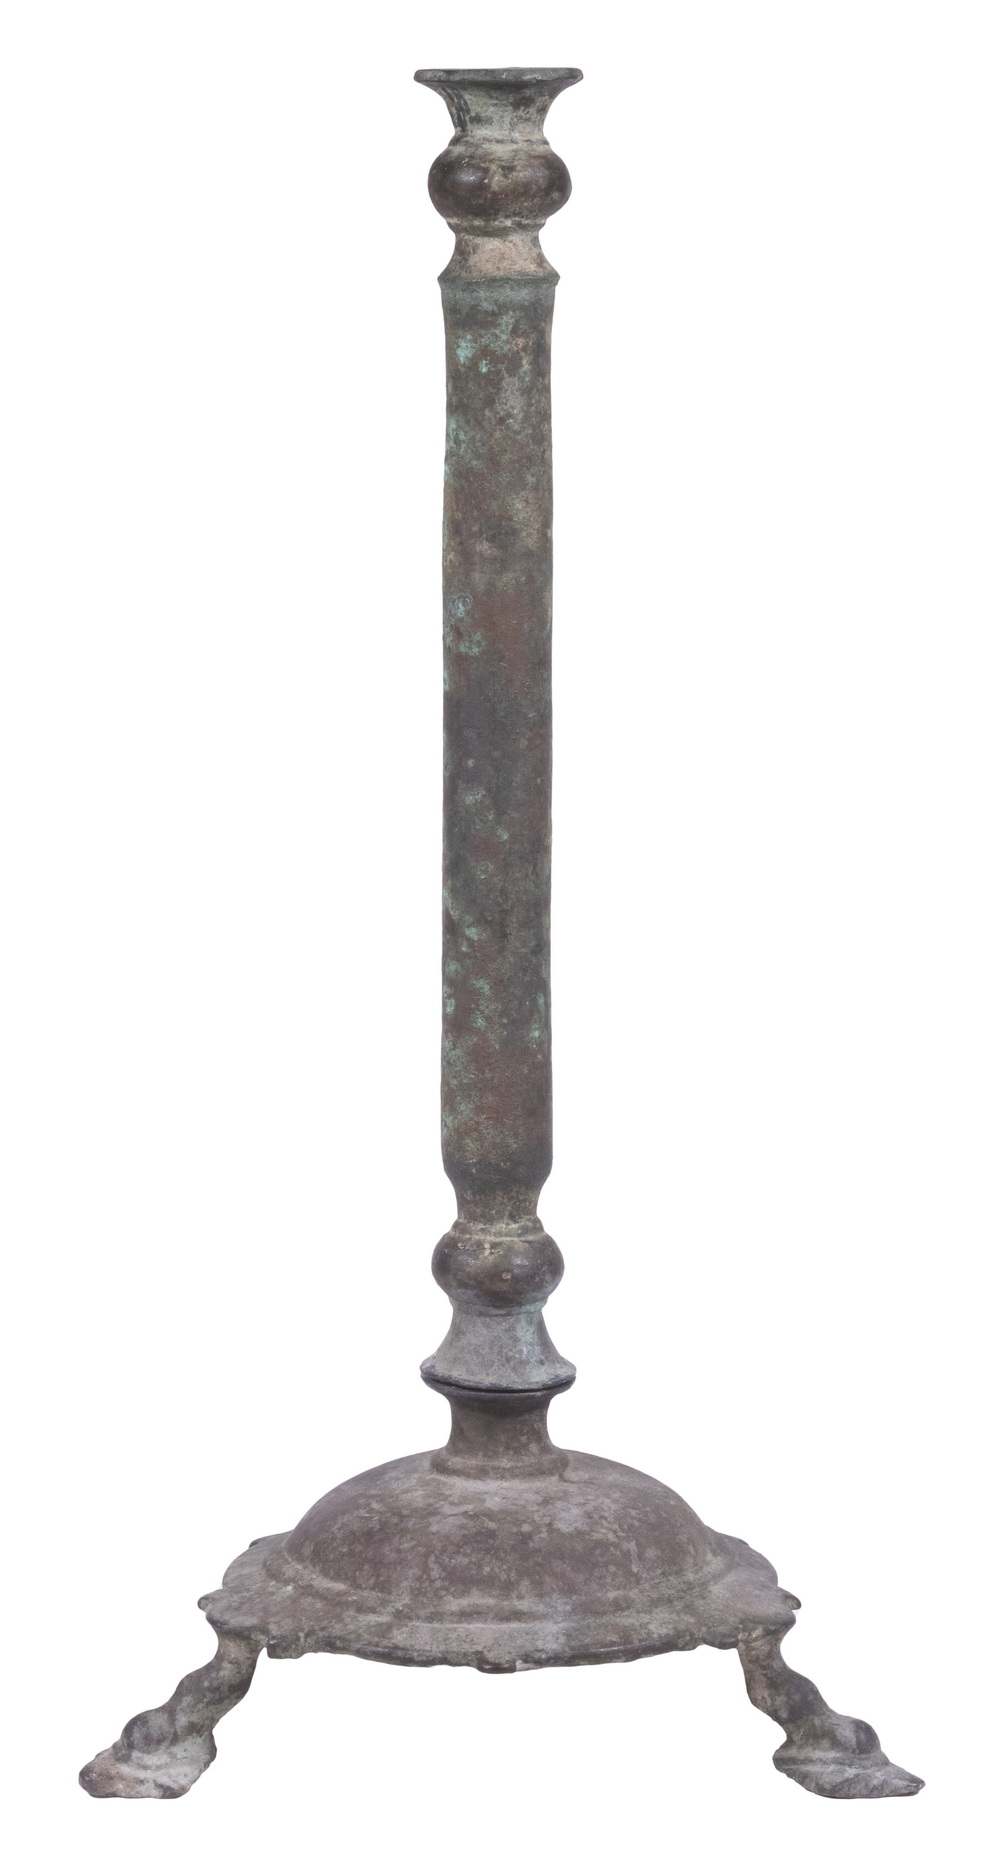 EARLY BRONZE CANDLESTICK 10th - 12th